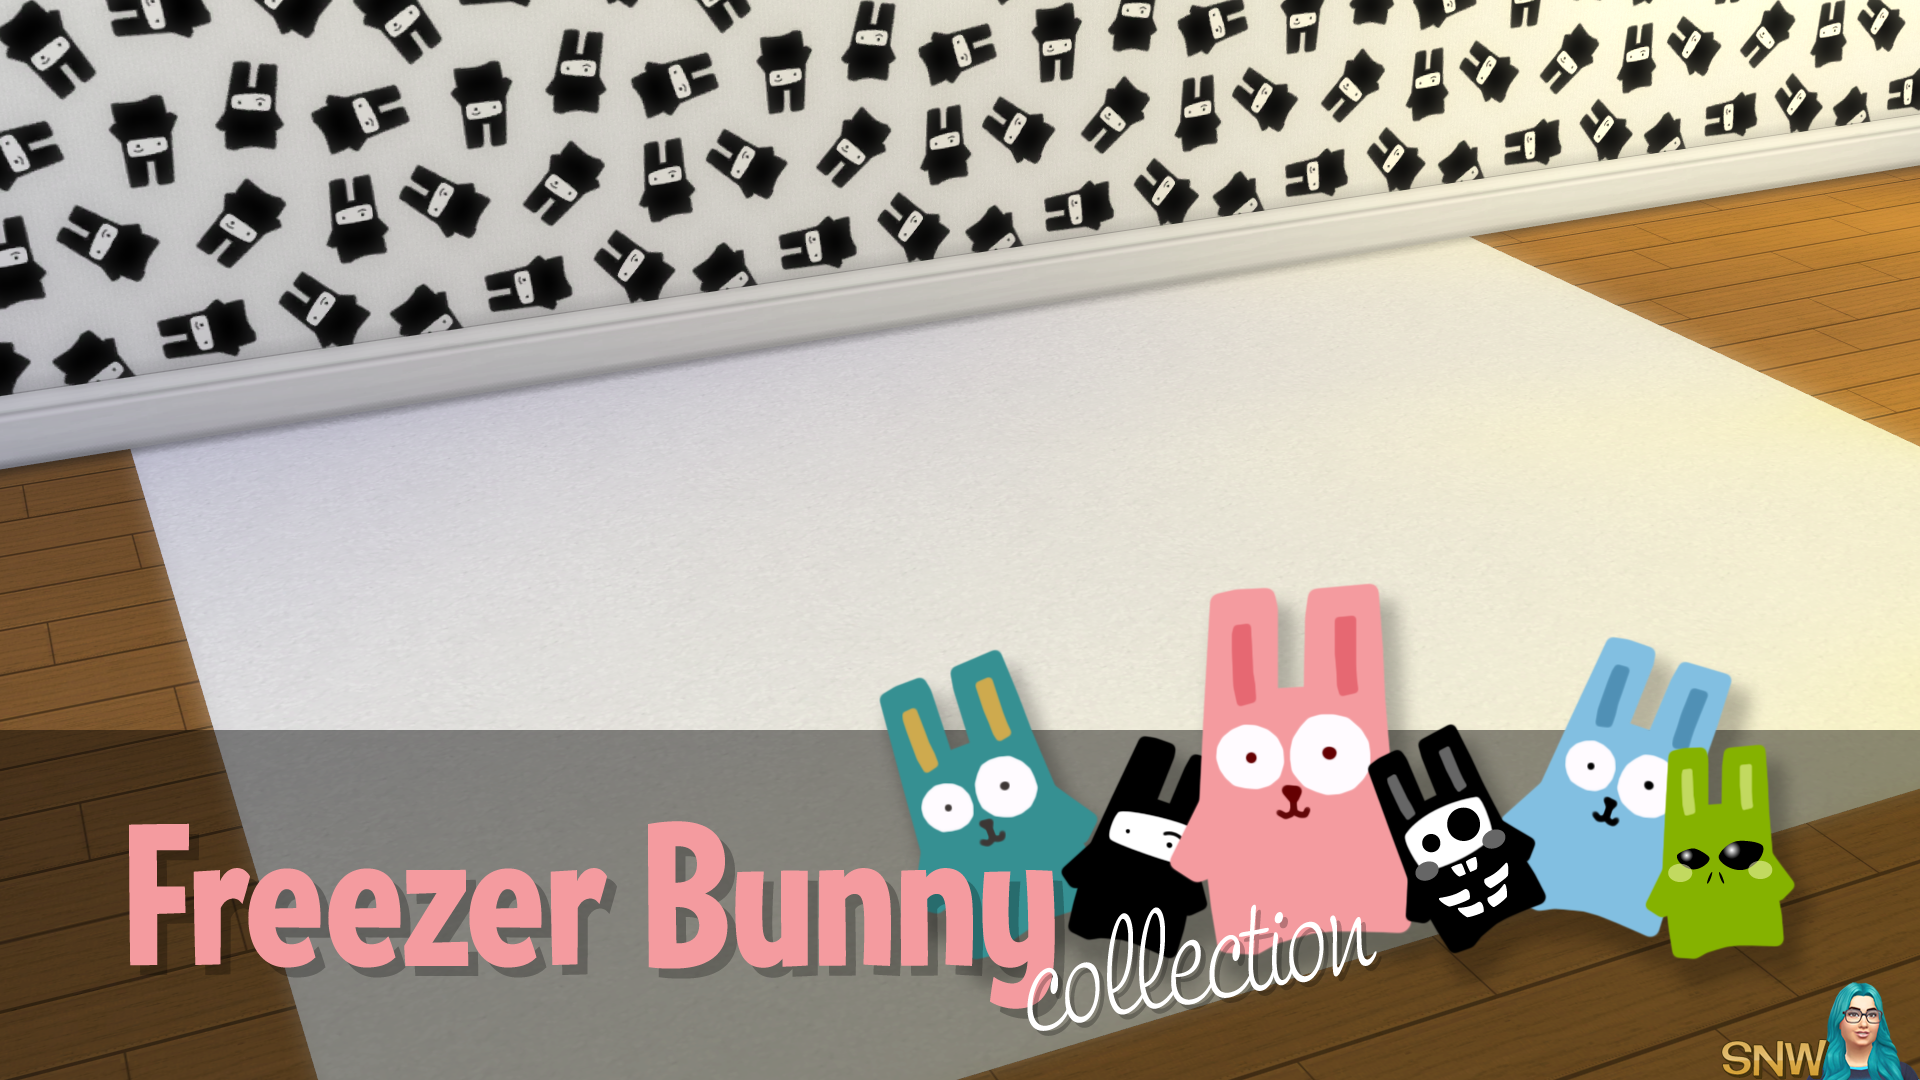 Freezer Bunny Collection: Carpets